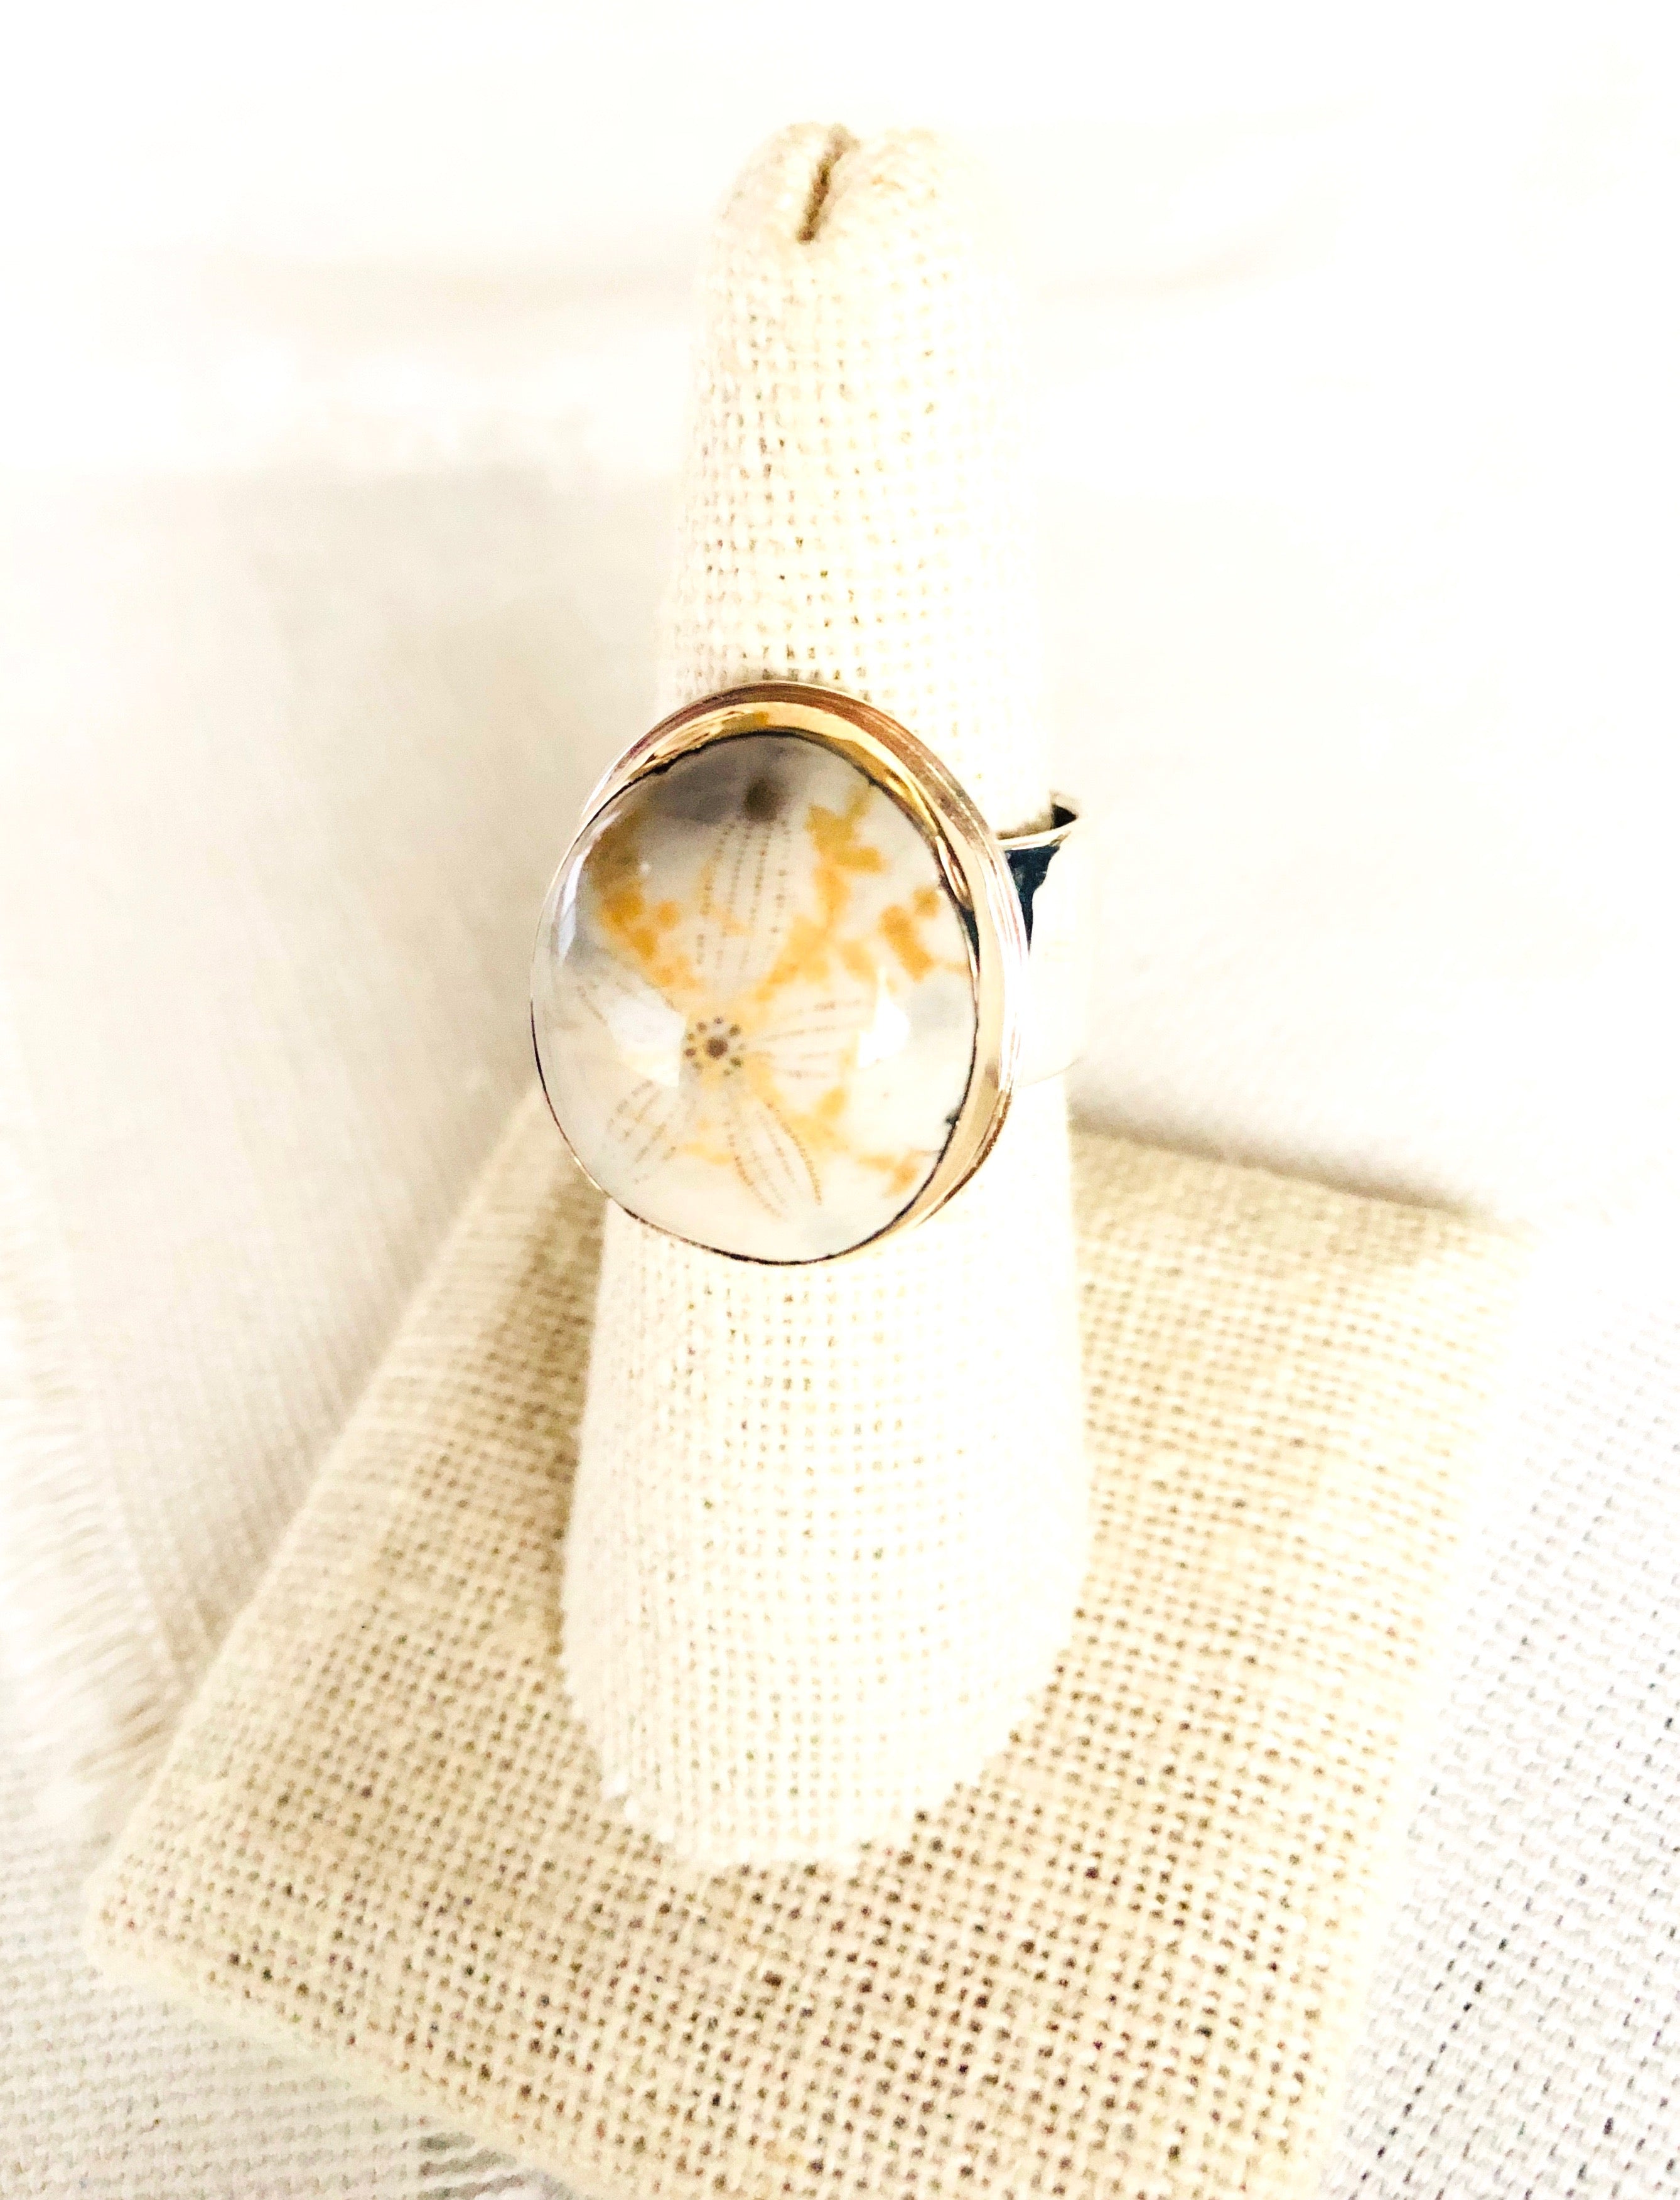 Who would think fossil jewelry would be so beautiful and feminine? This fossilized sea urchin ring is bezel set in 14 kt gold and soldered to a sterling silver back plate and hand hammered shank.